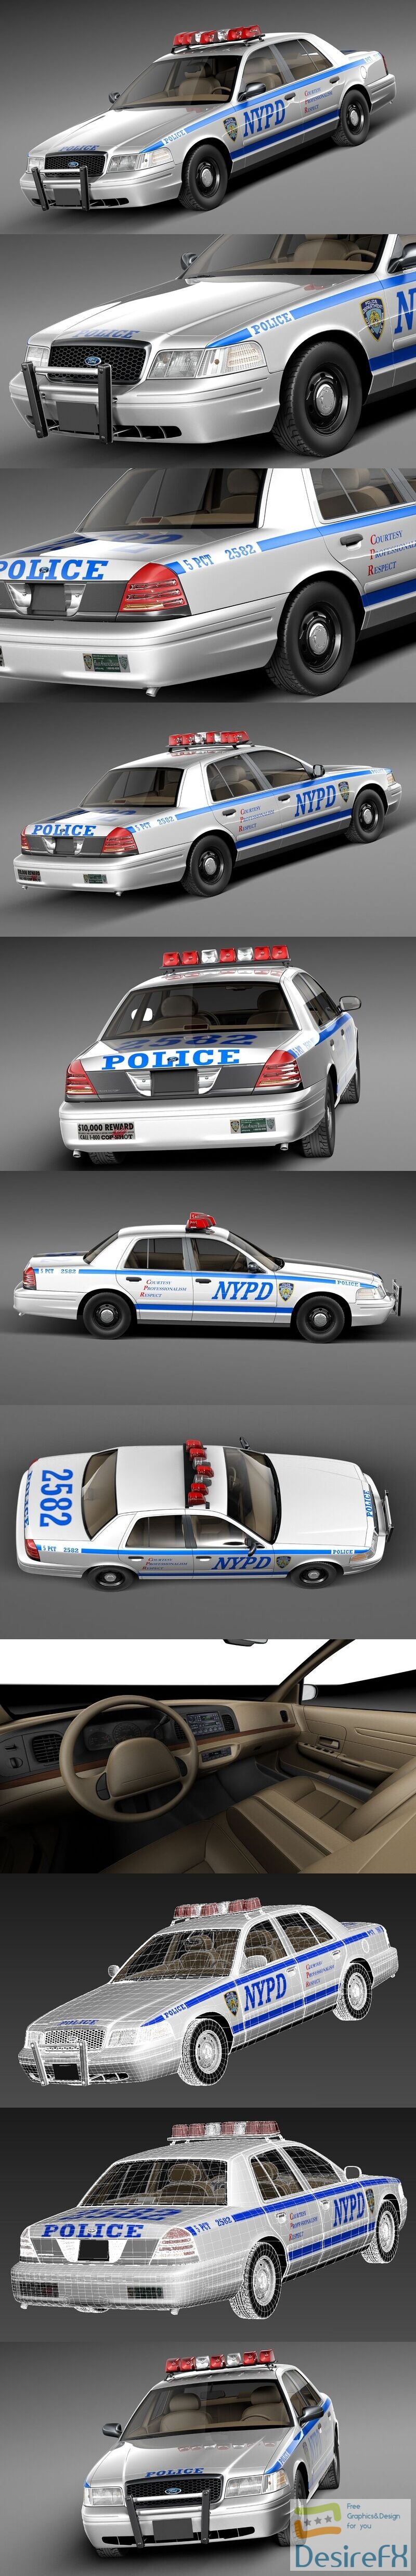 Ford Crown Victoria Police Car 1998-2011 3D Model